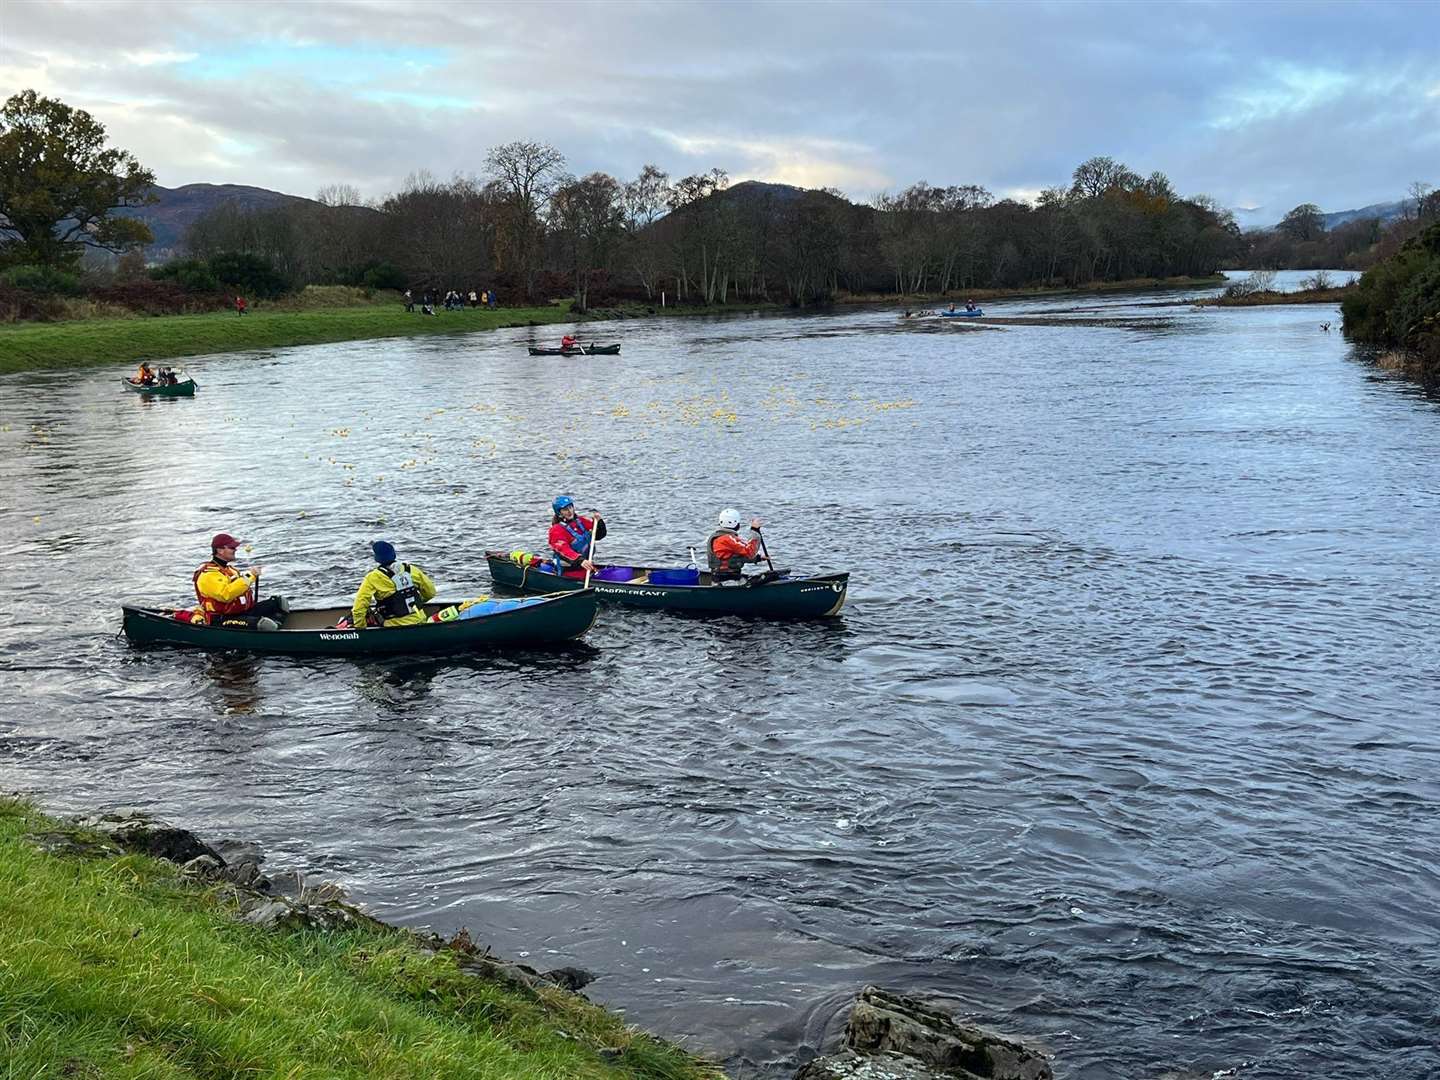 Paddlers prepared to retrieve the ducks – all 1000 of them!